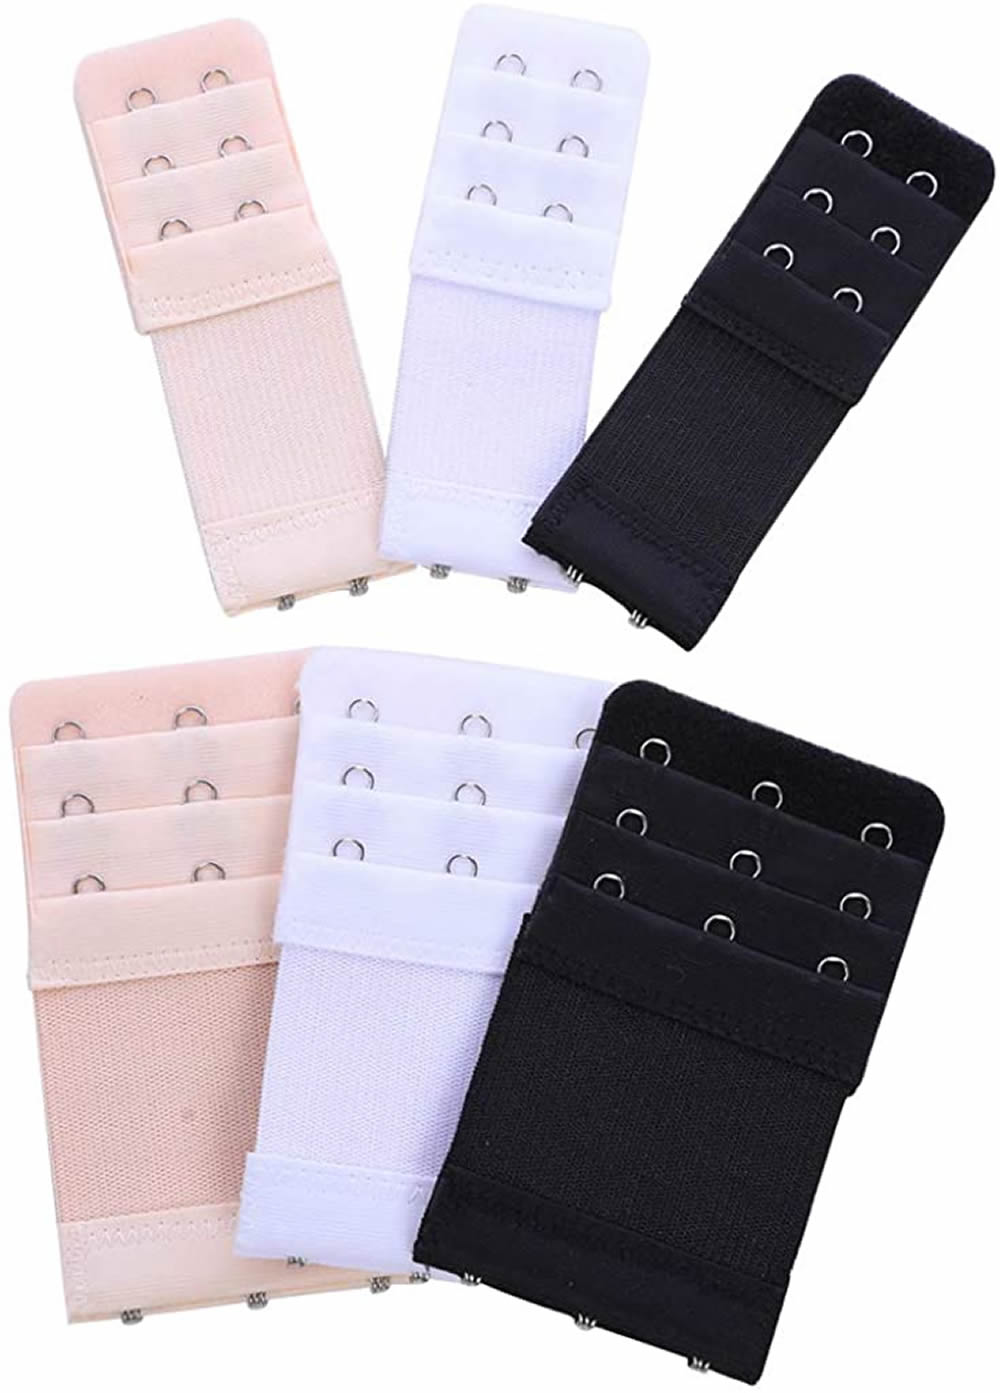 Bra Extender 3 Hook Bra Extension Strap Soft Stretchy, Pack of 3 at   Women's Clothing store